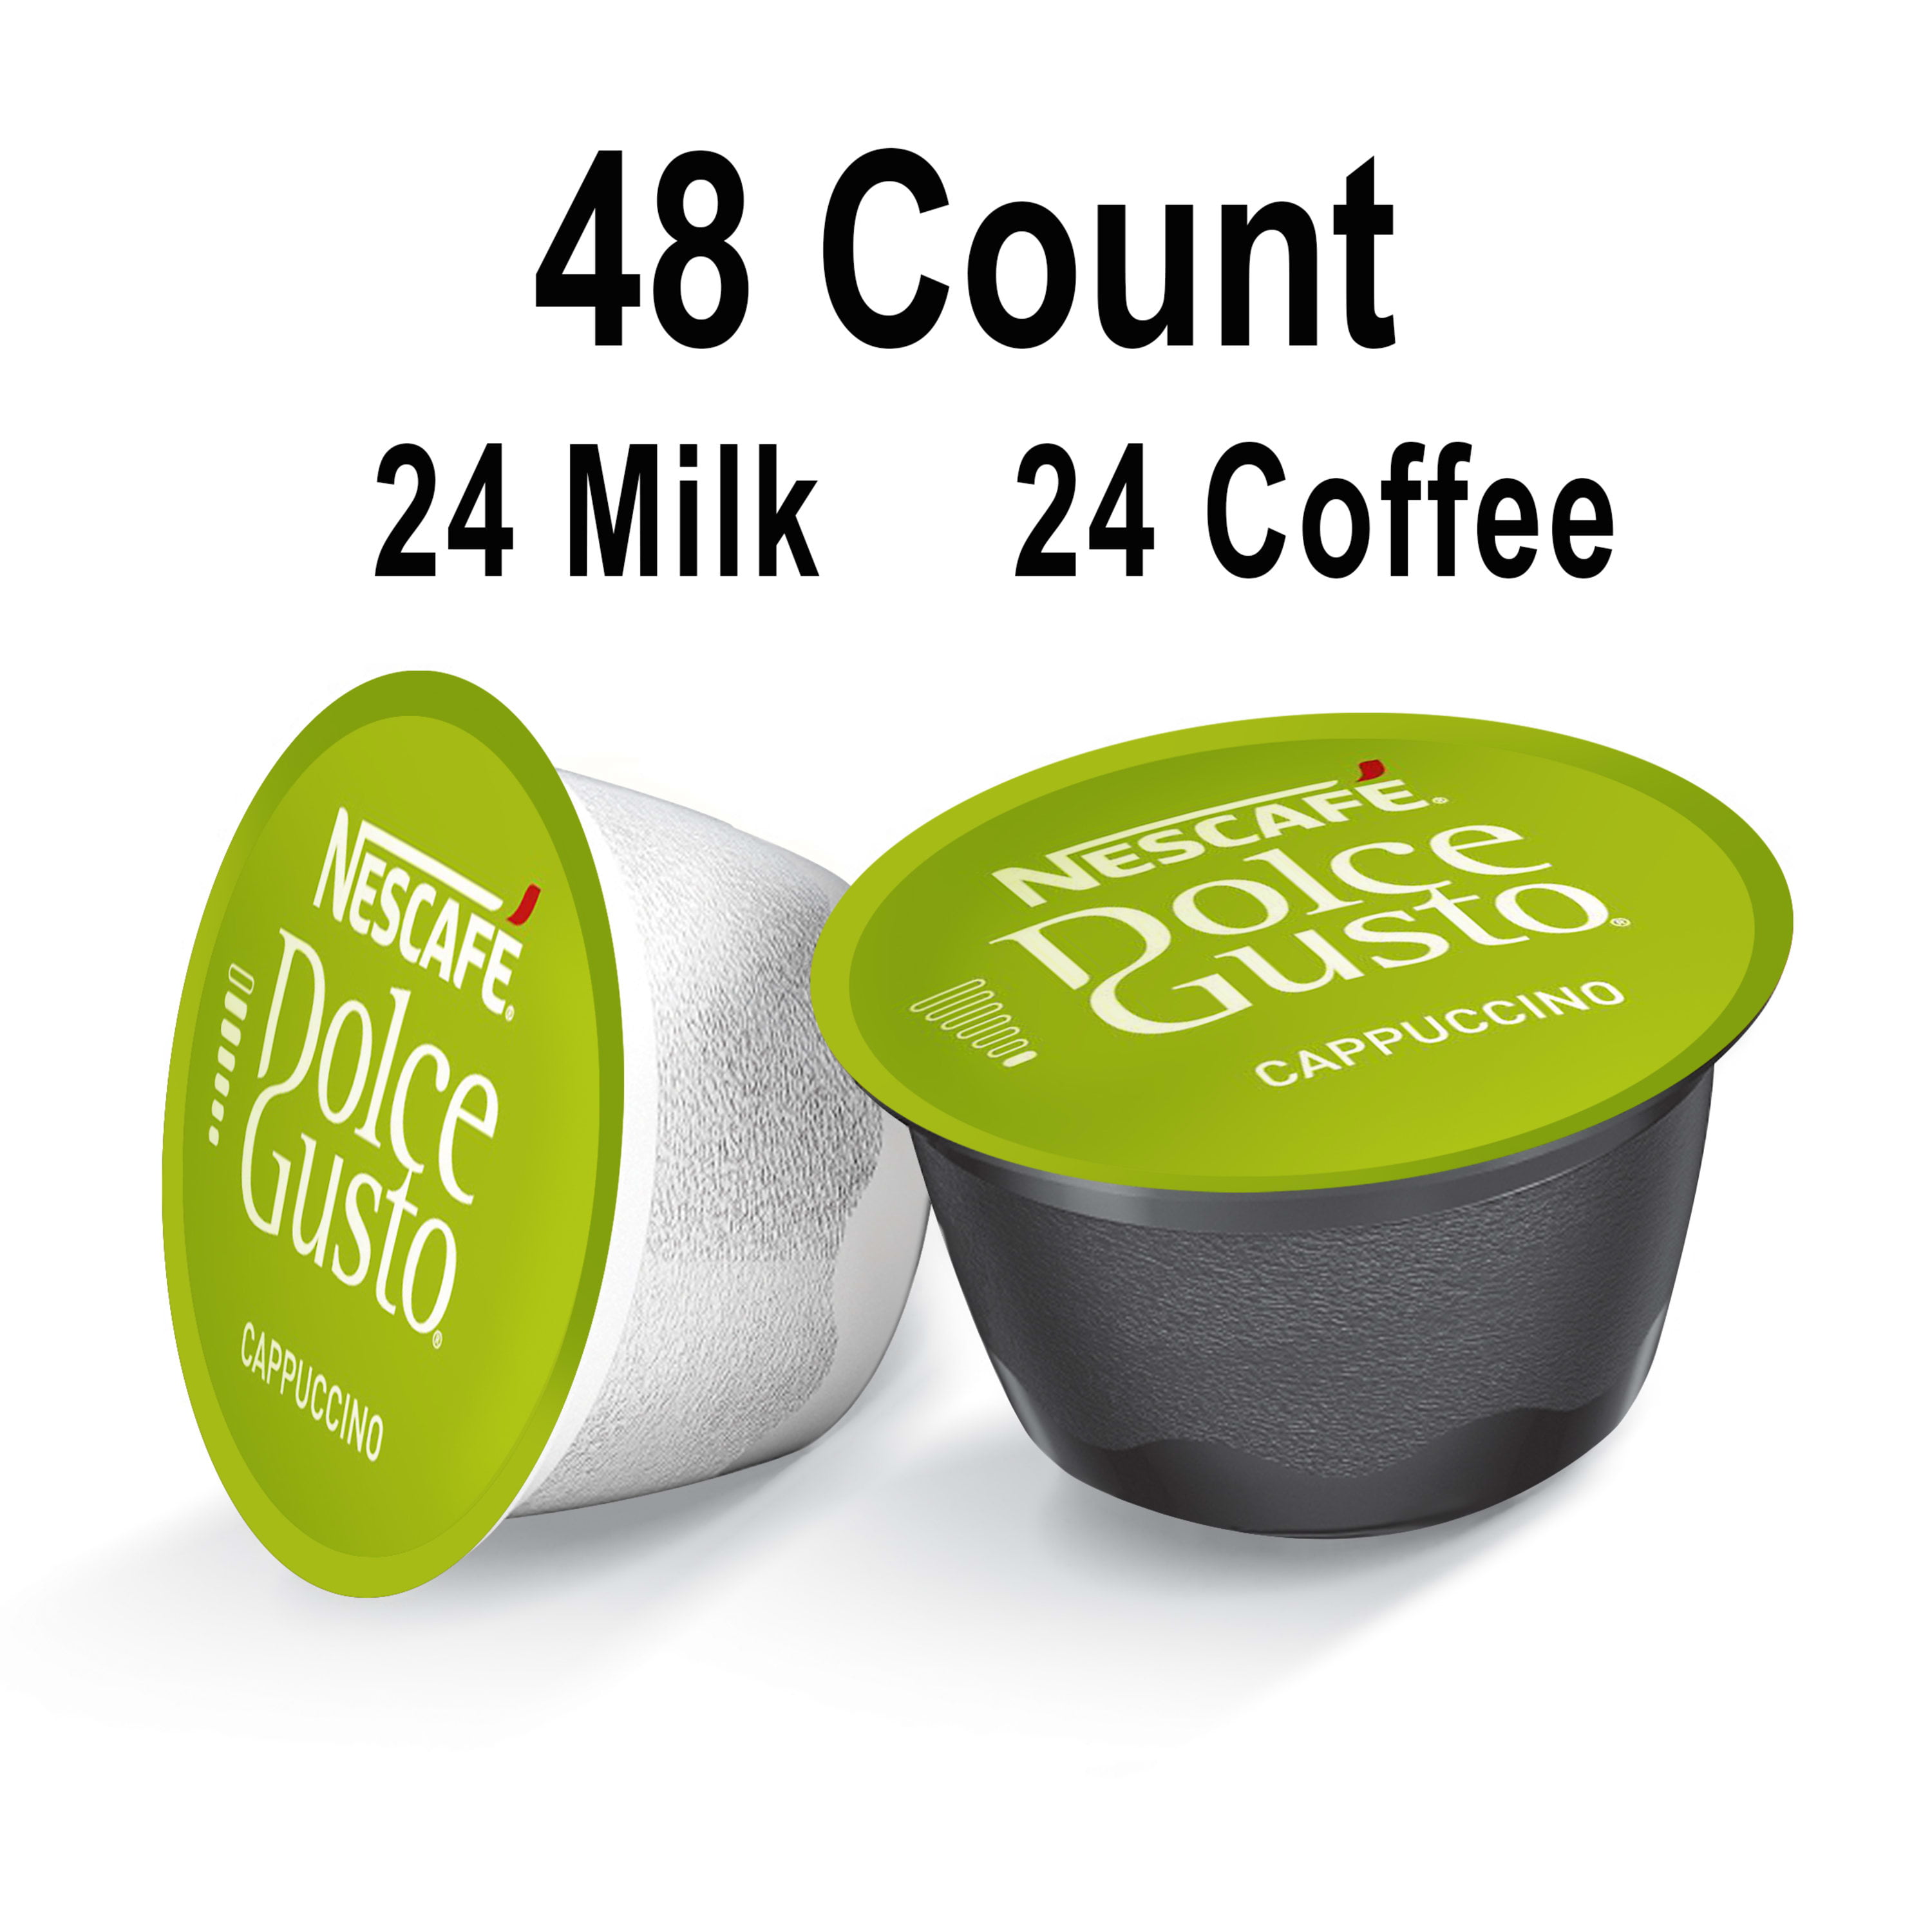 Starbucks by Nescafe Dolce Gusto Cappuccino Coffee Pods Pack is not halal